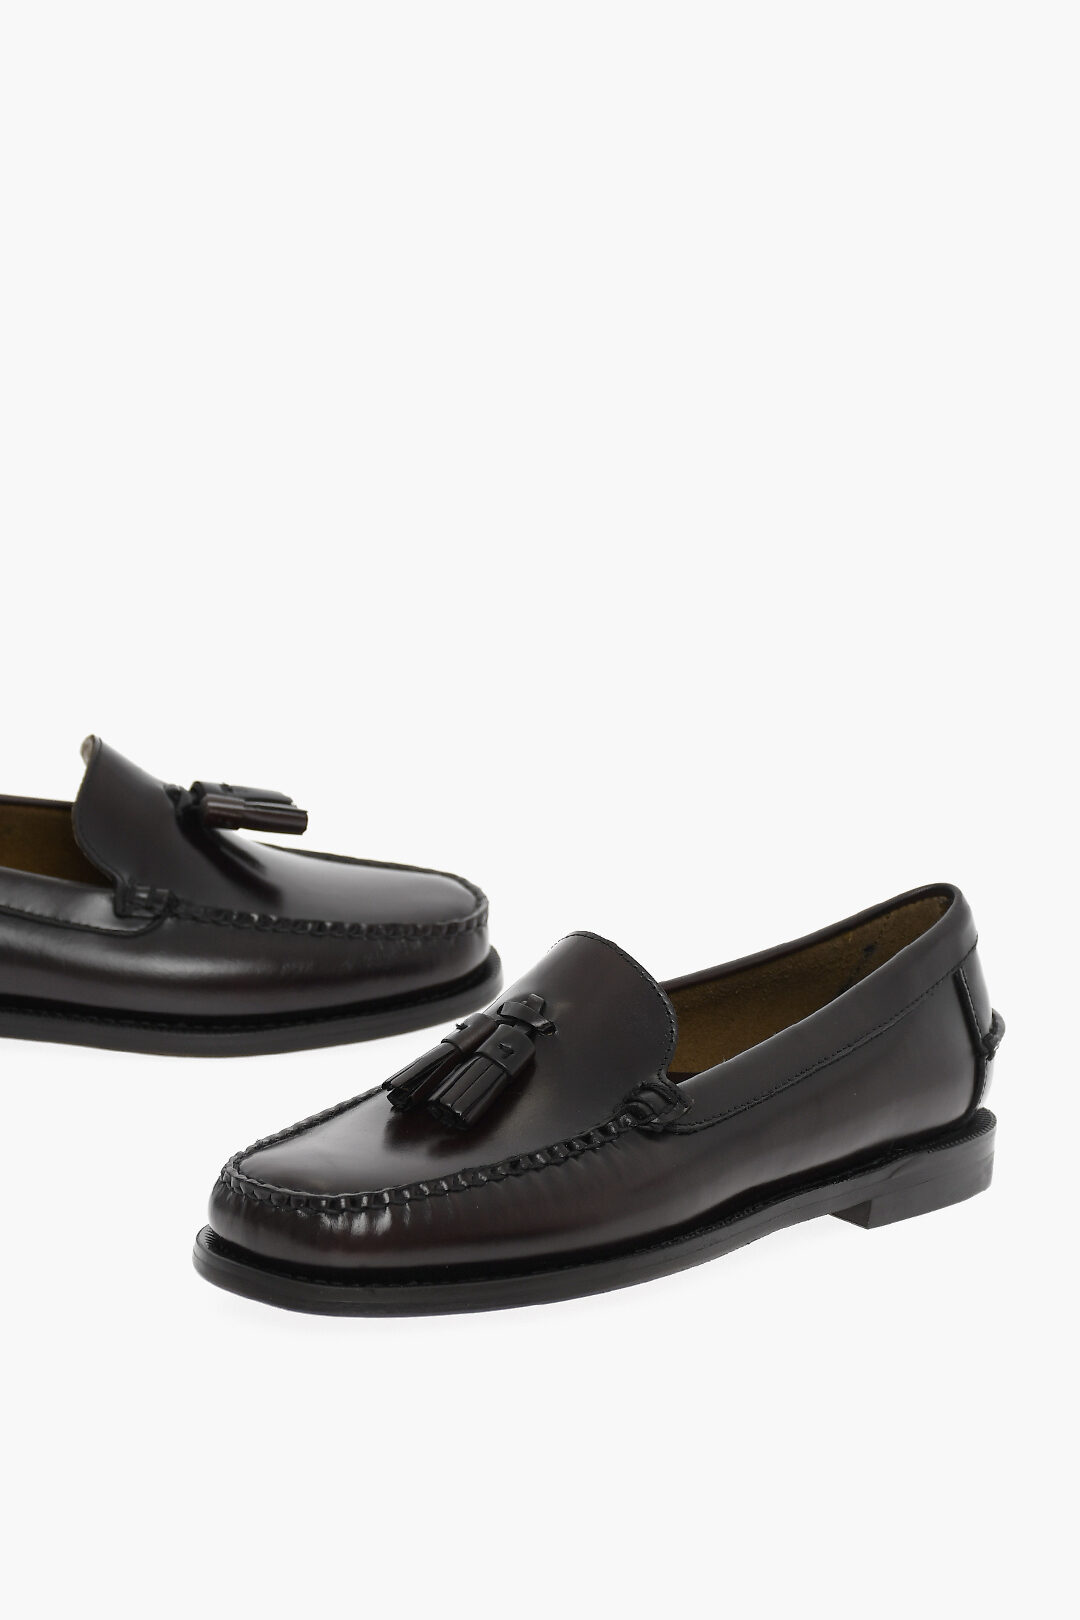 Sebago Leather Loafers With Tassels And Leather Sole women - Glamood Outlet